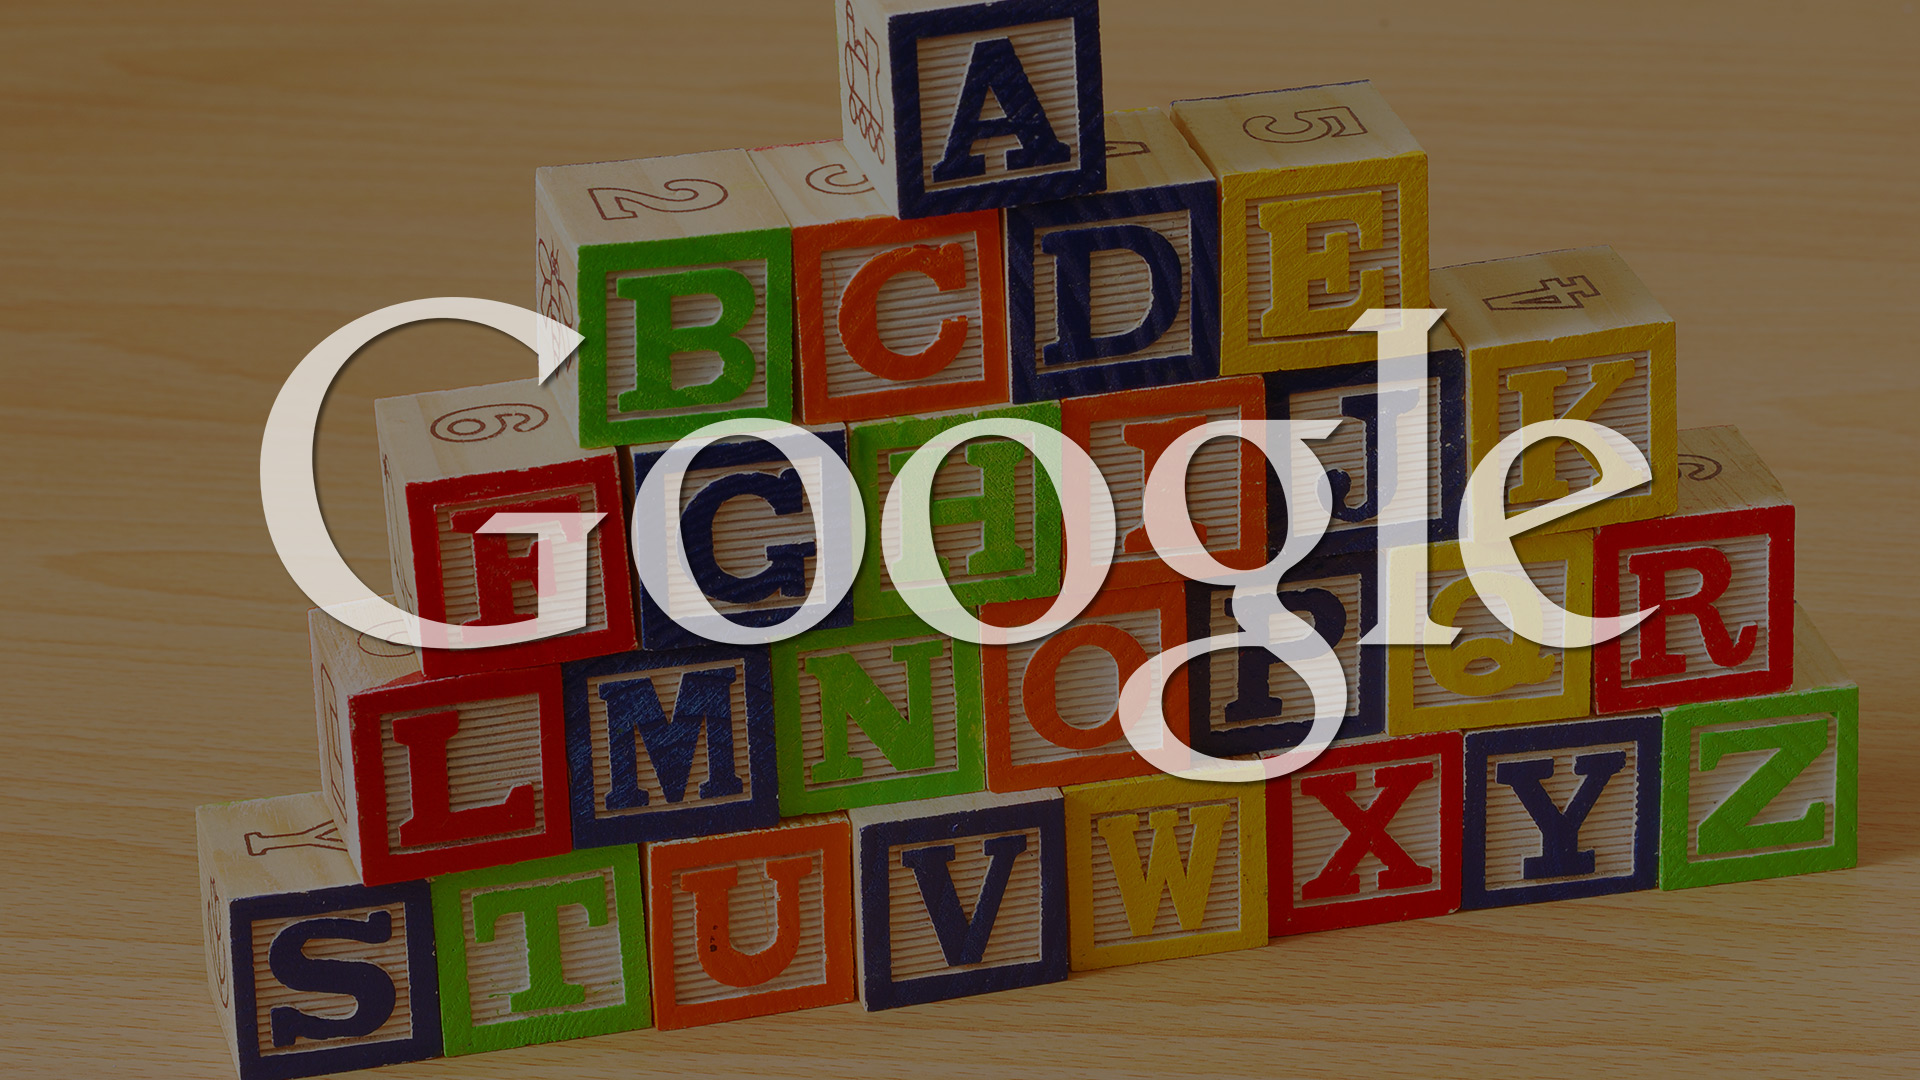 The Google logo in front of some toy blocks